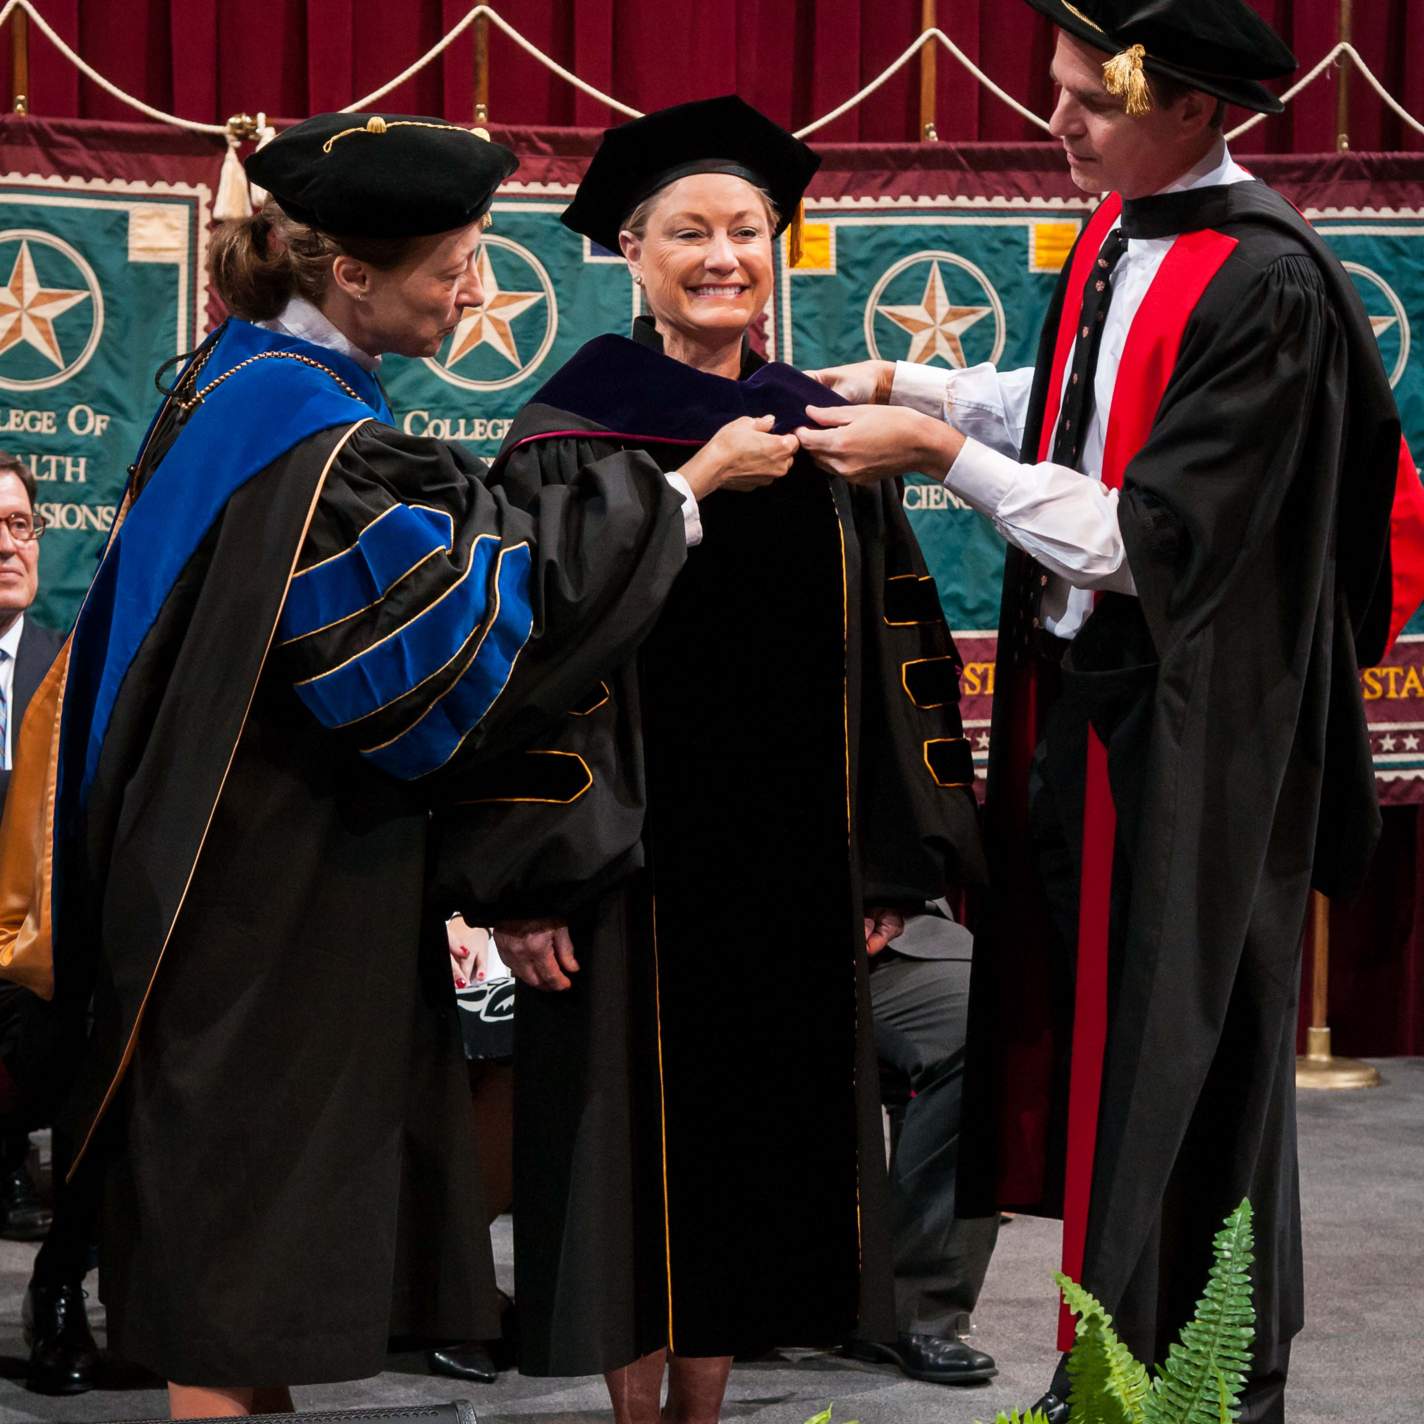 Mrs. Linda Fields Hooded by President Dr. Trauth and Provost Bourgeois